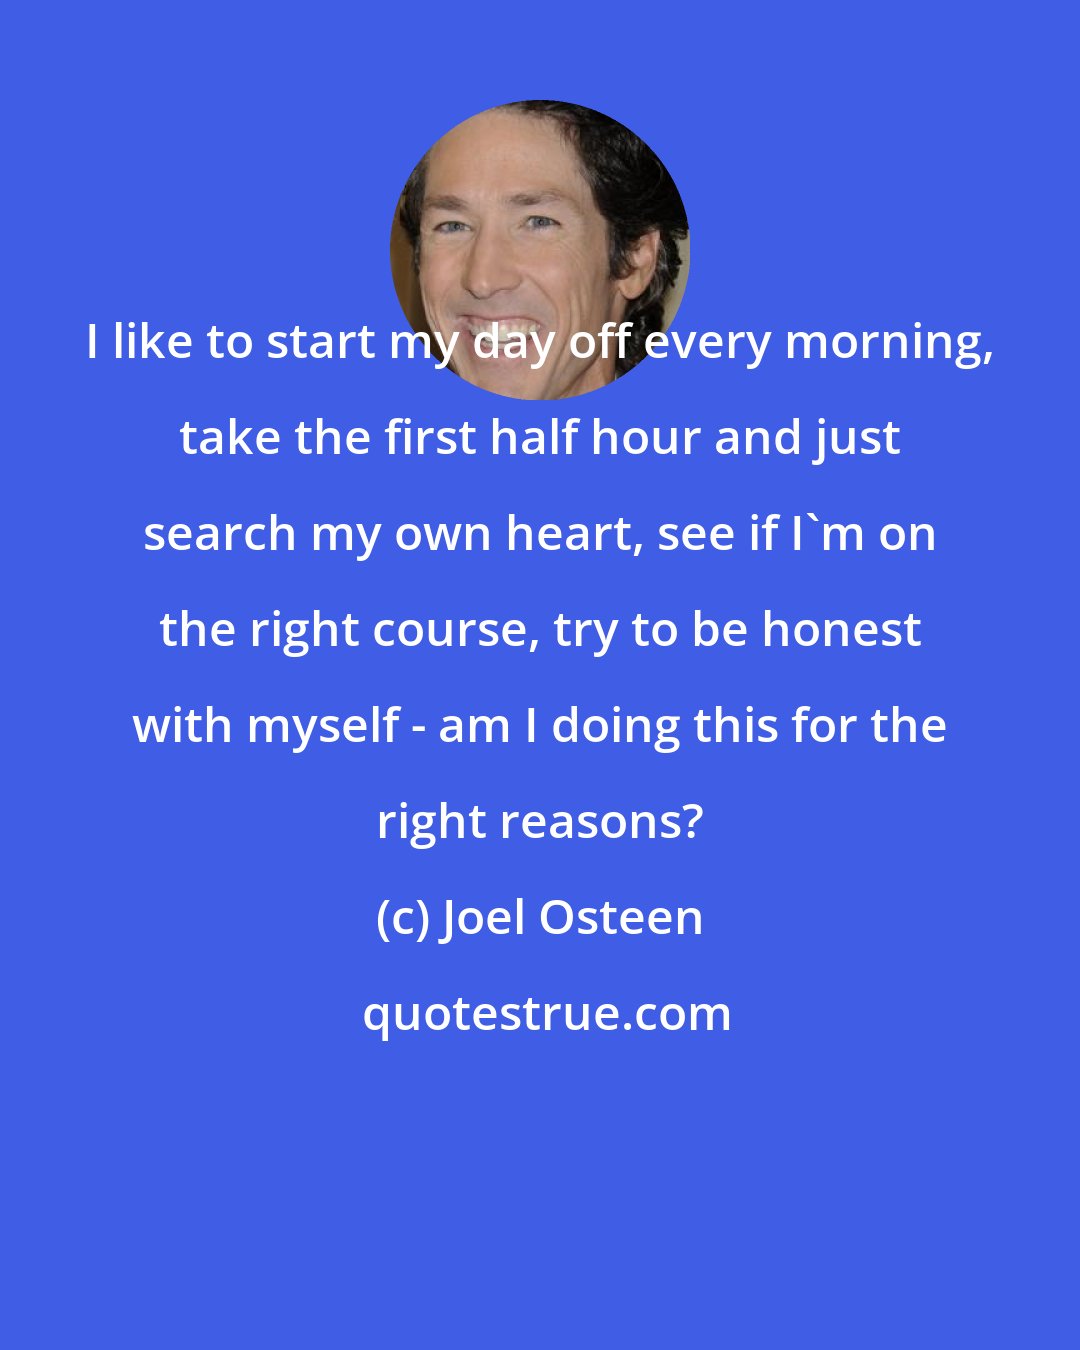 Joel Osteen: I like to start my day off every morning, take the first half hour and just search my own heart, see if I'm on the right course, try to be honest with myself - am I doing this for the right reasons?